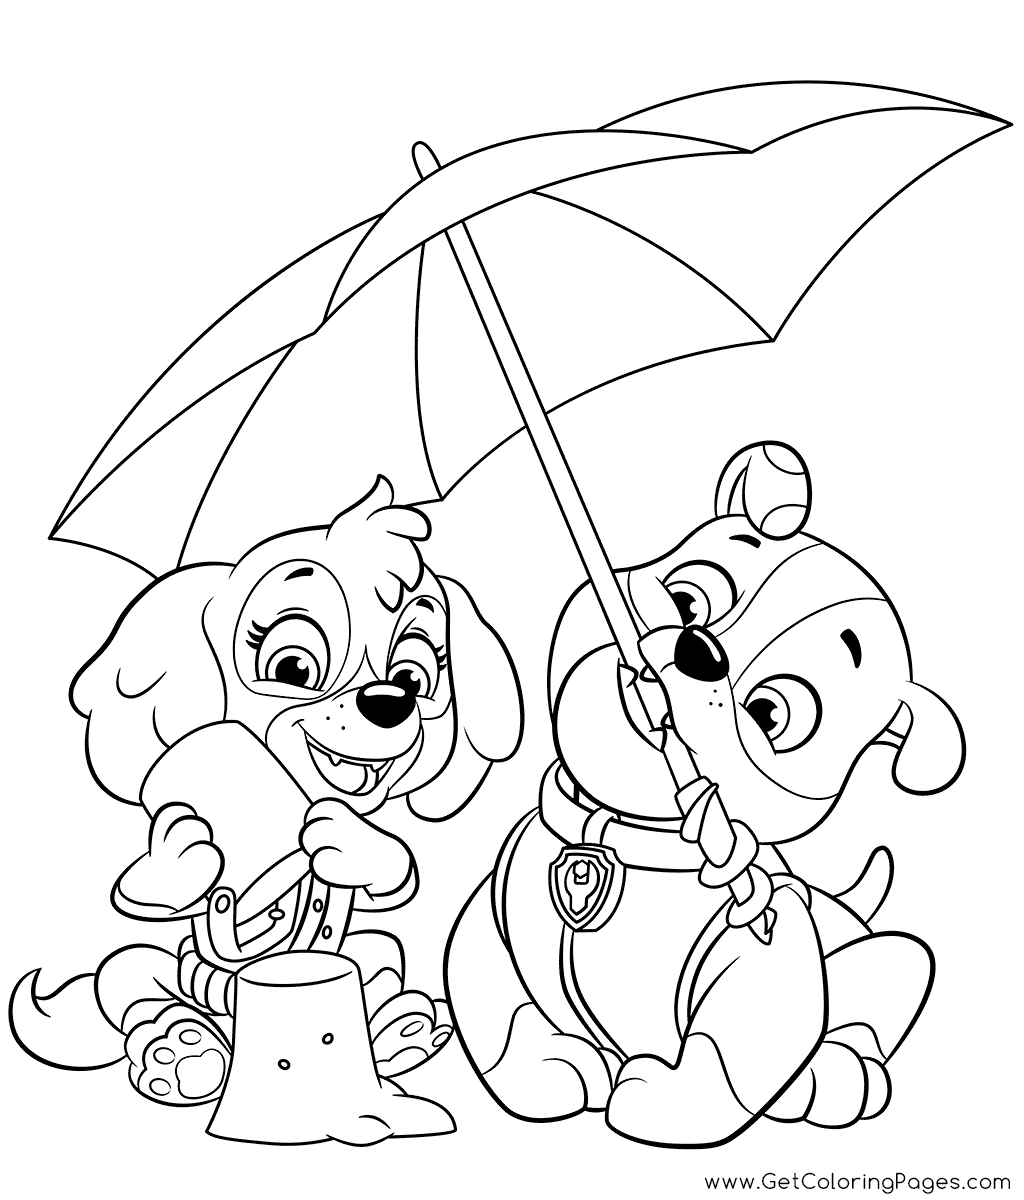 Paw Patrol Rubble and Skye Coloring Page